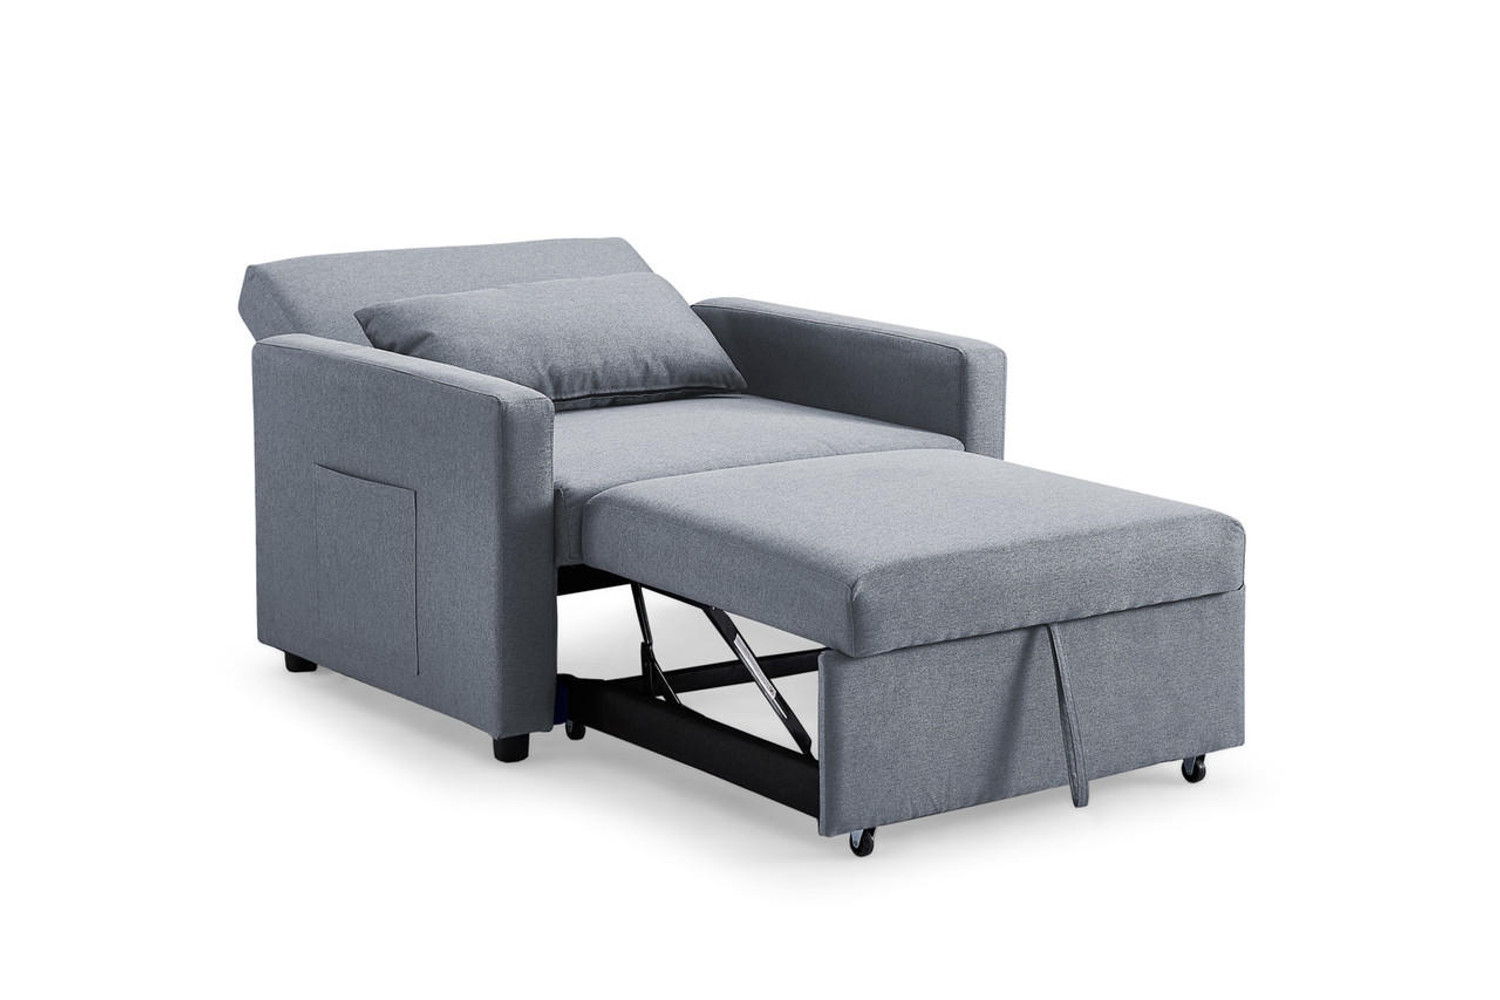 Honeypot Furniture Aria Sofabed Grey Armchair 